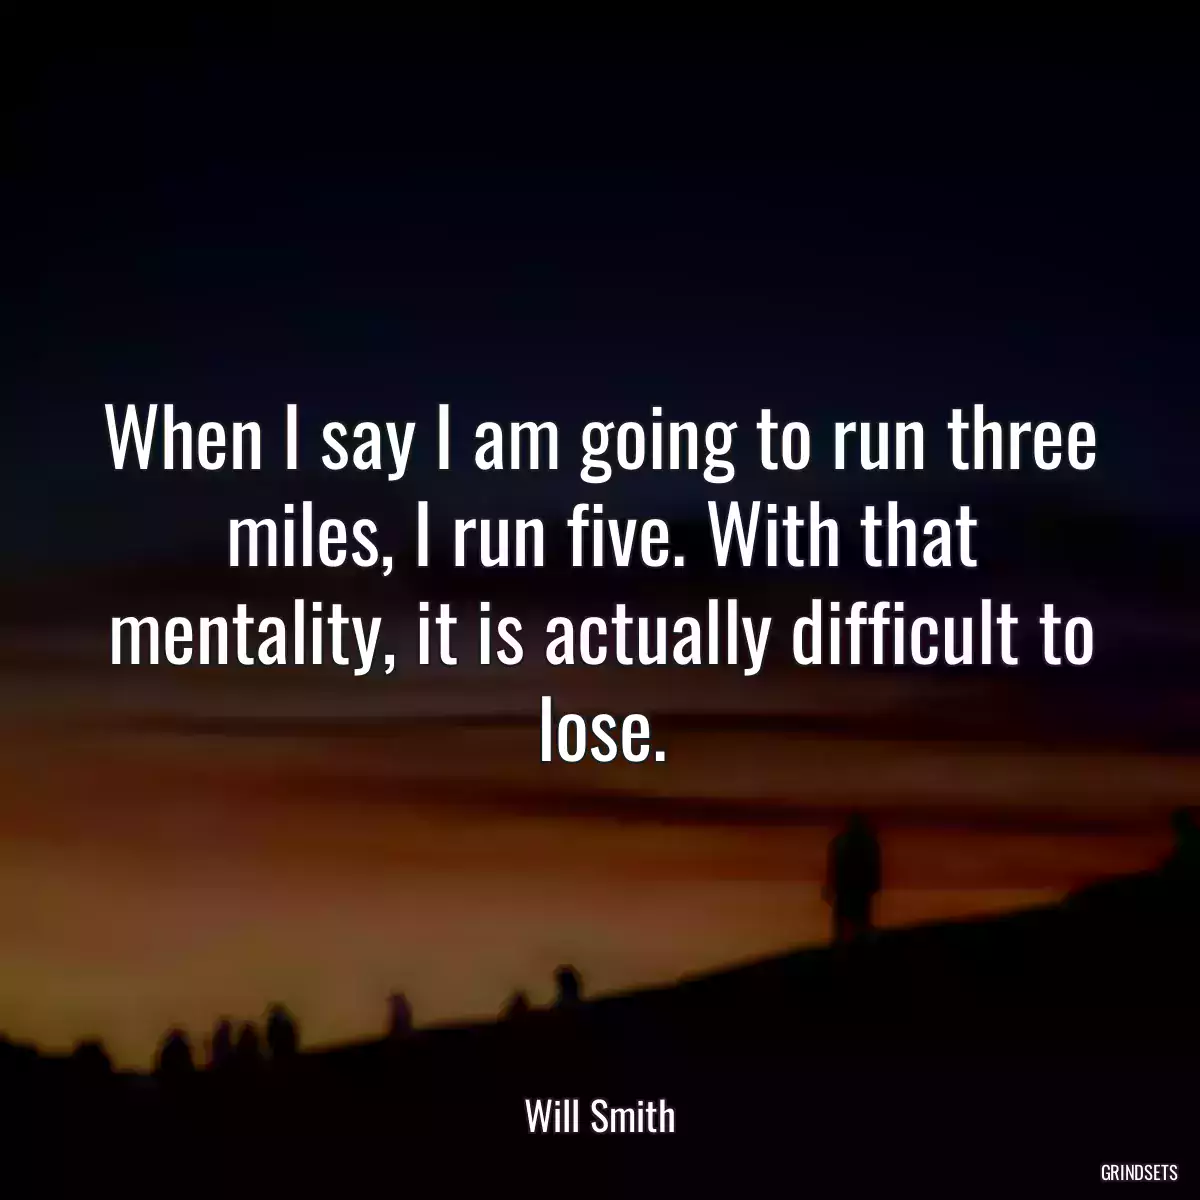 When I say I am going to run three miles, I run five. With that mentality, it is actually difficult to lose.